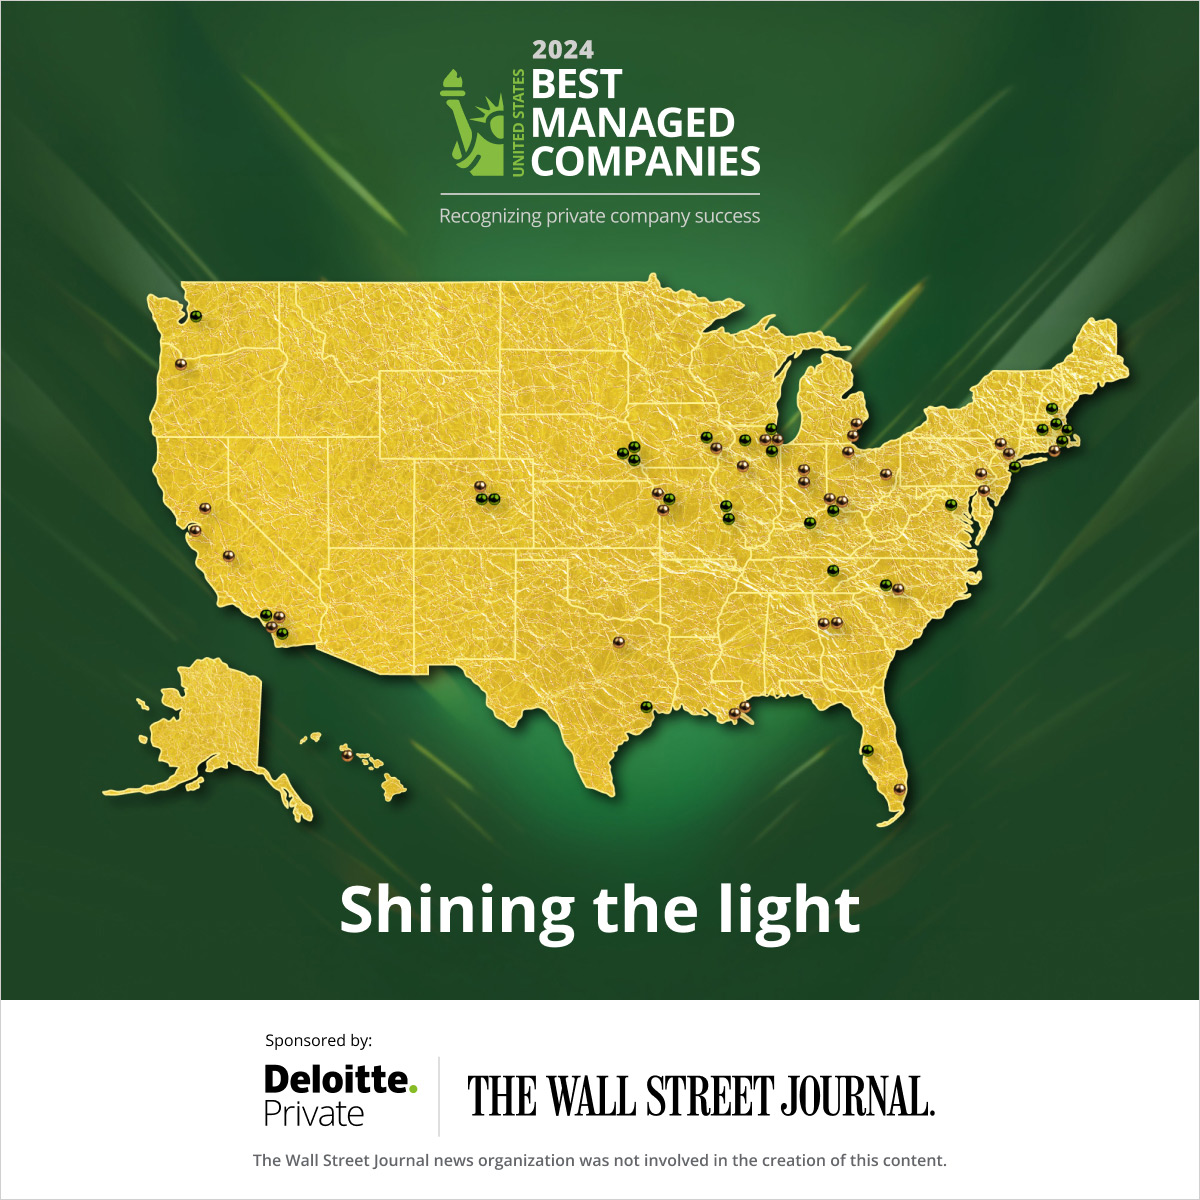 We’re honoring 62 #privatecompanies across the US for being dedicated to excellence, making an impact, and inspiring others. #USBestManagedCompanies deloi.tt/4bnRcMq